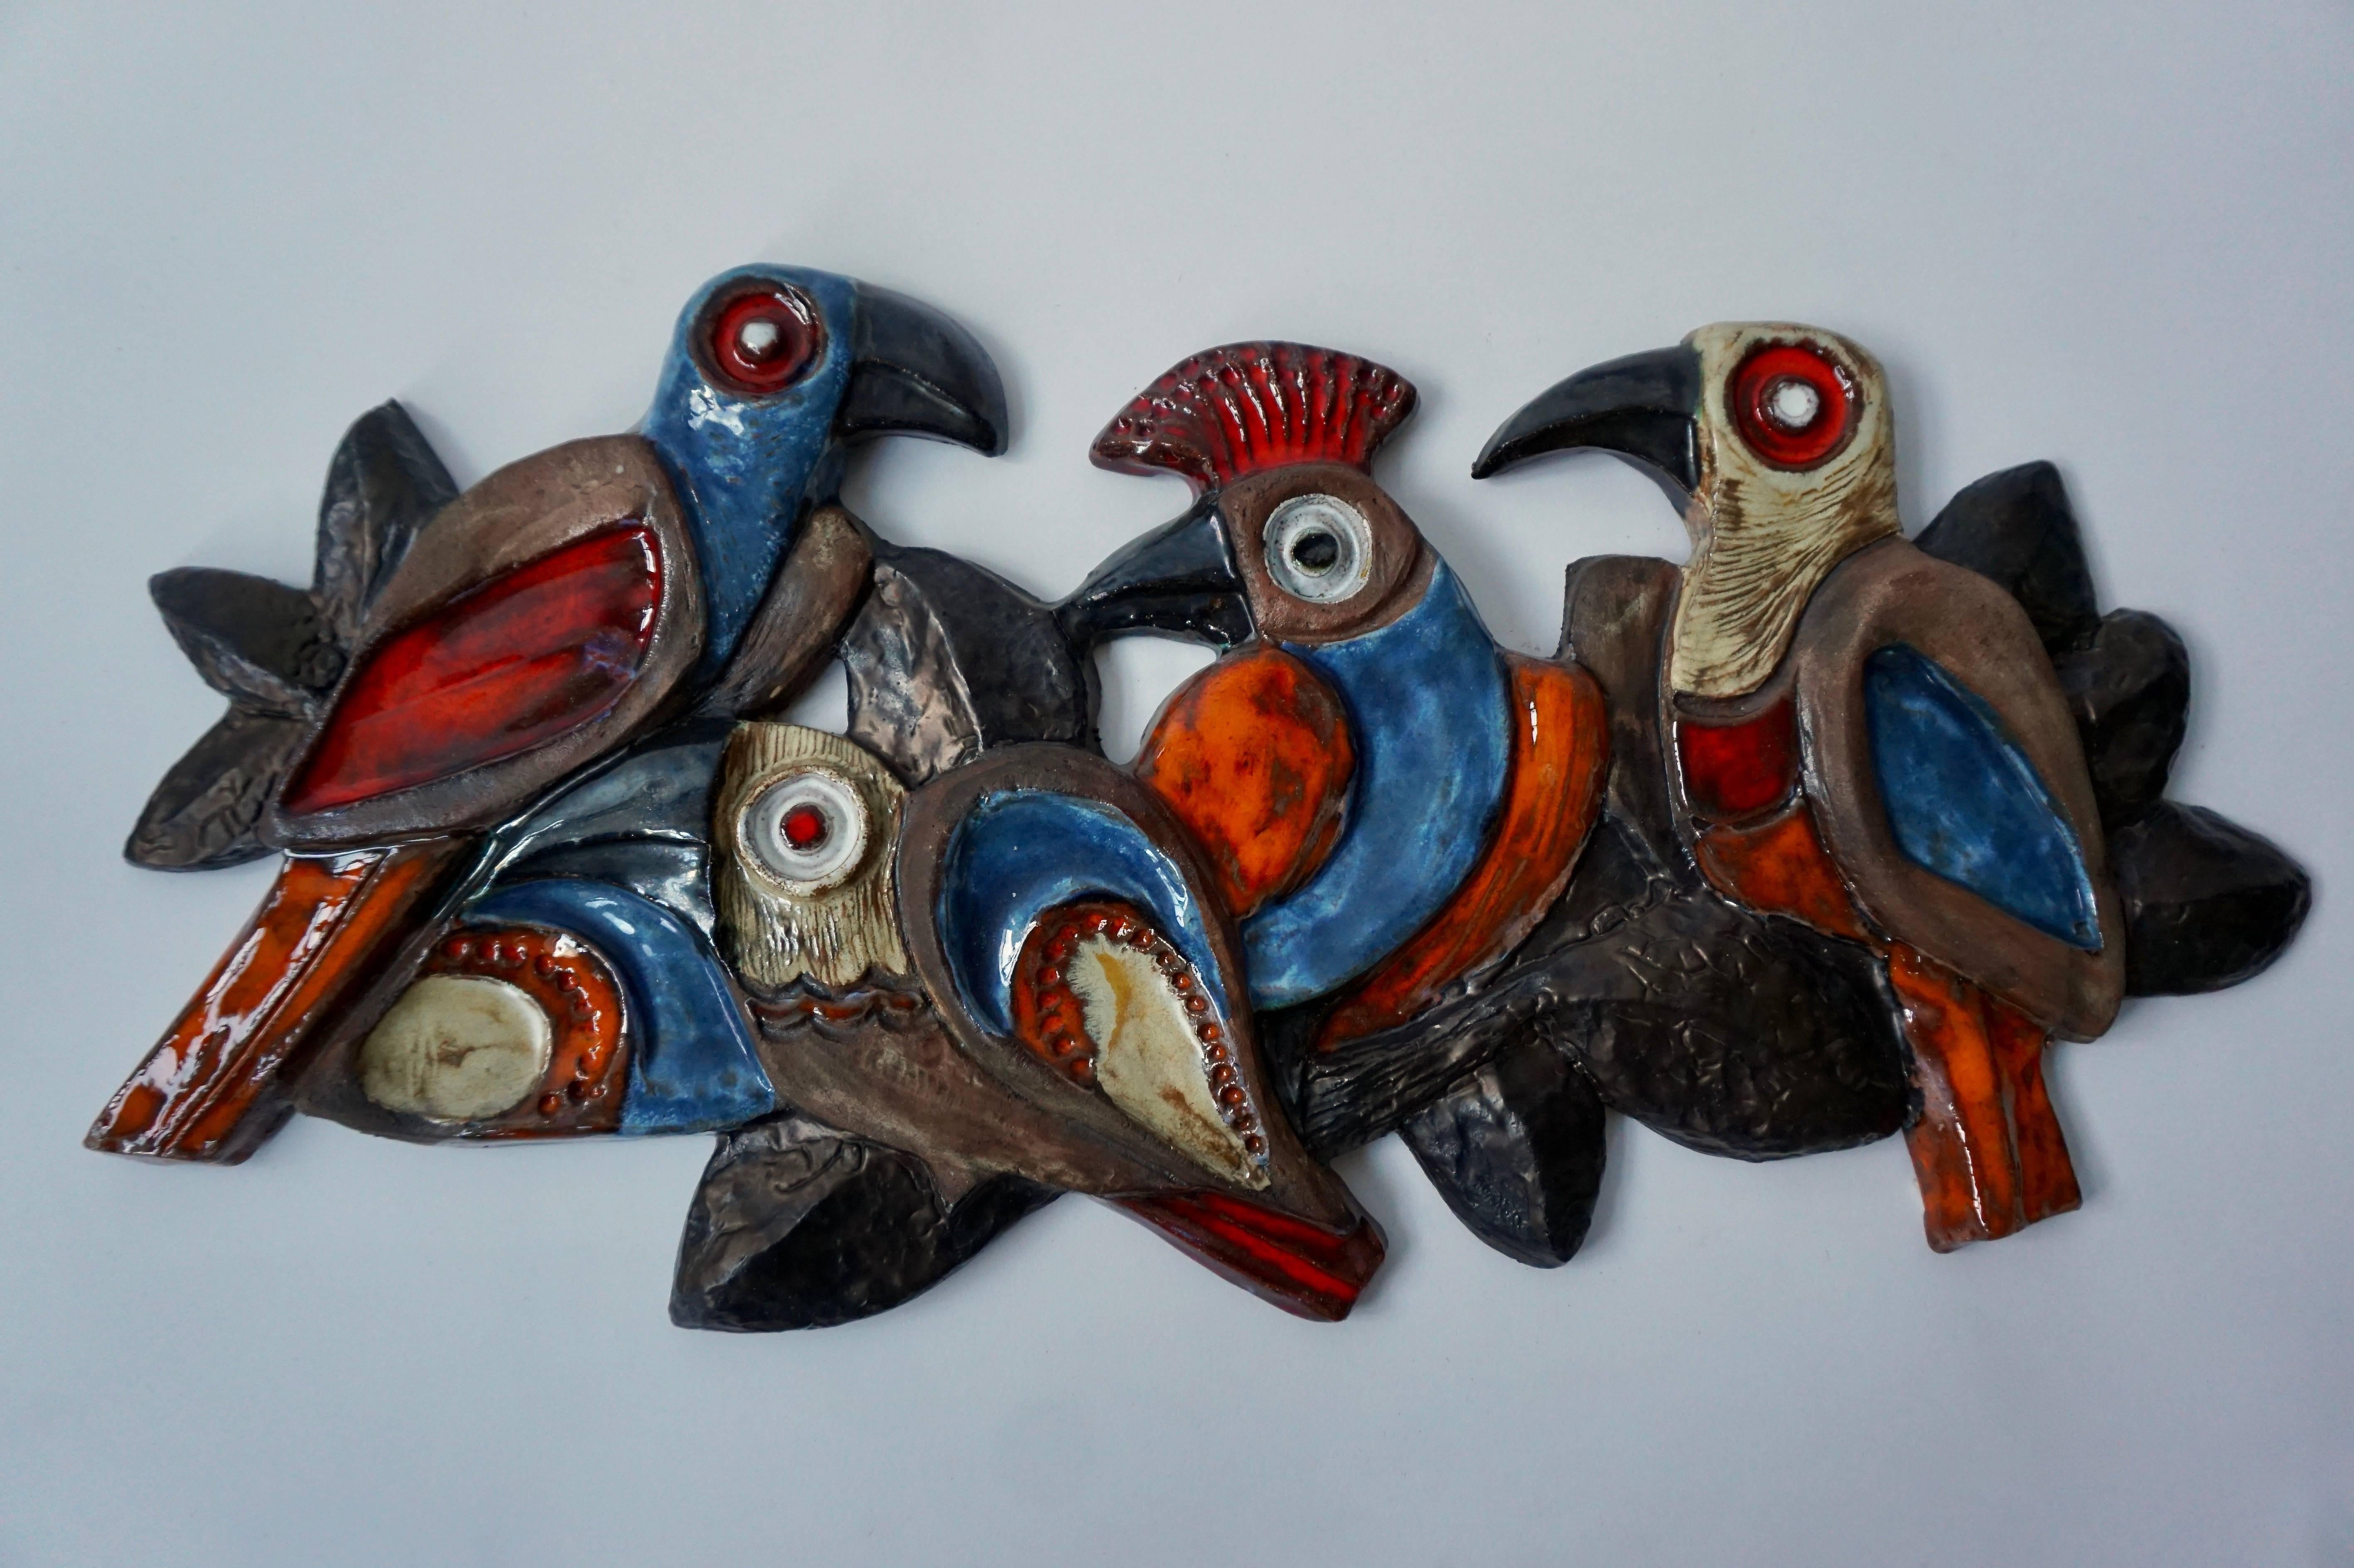 Glazed Ceramic Wall Sculpture with Birds For Sale